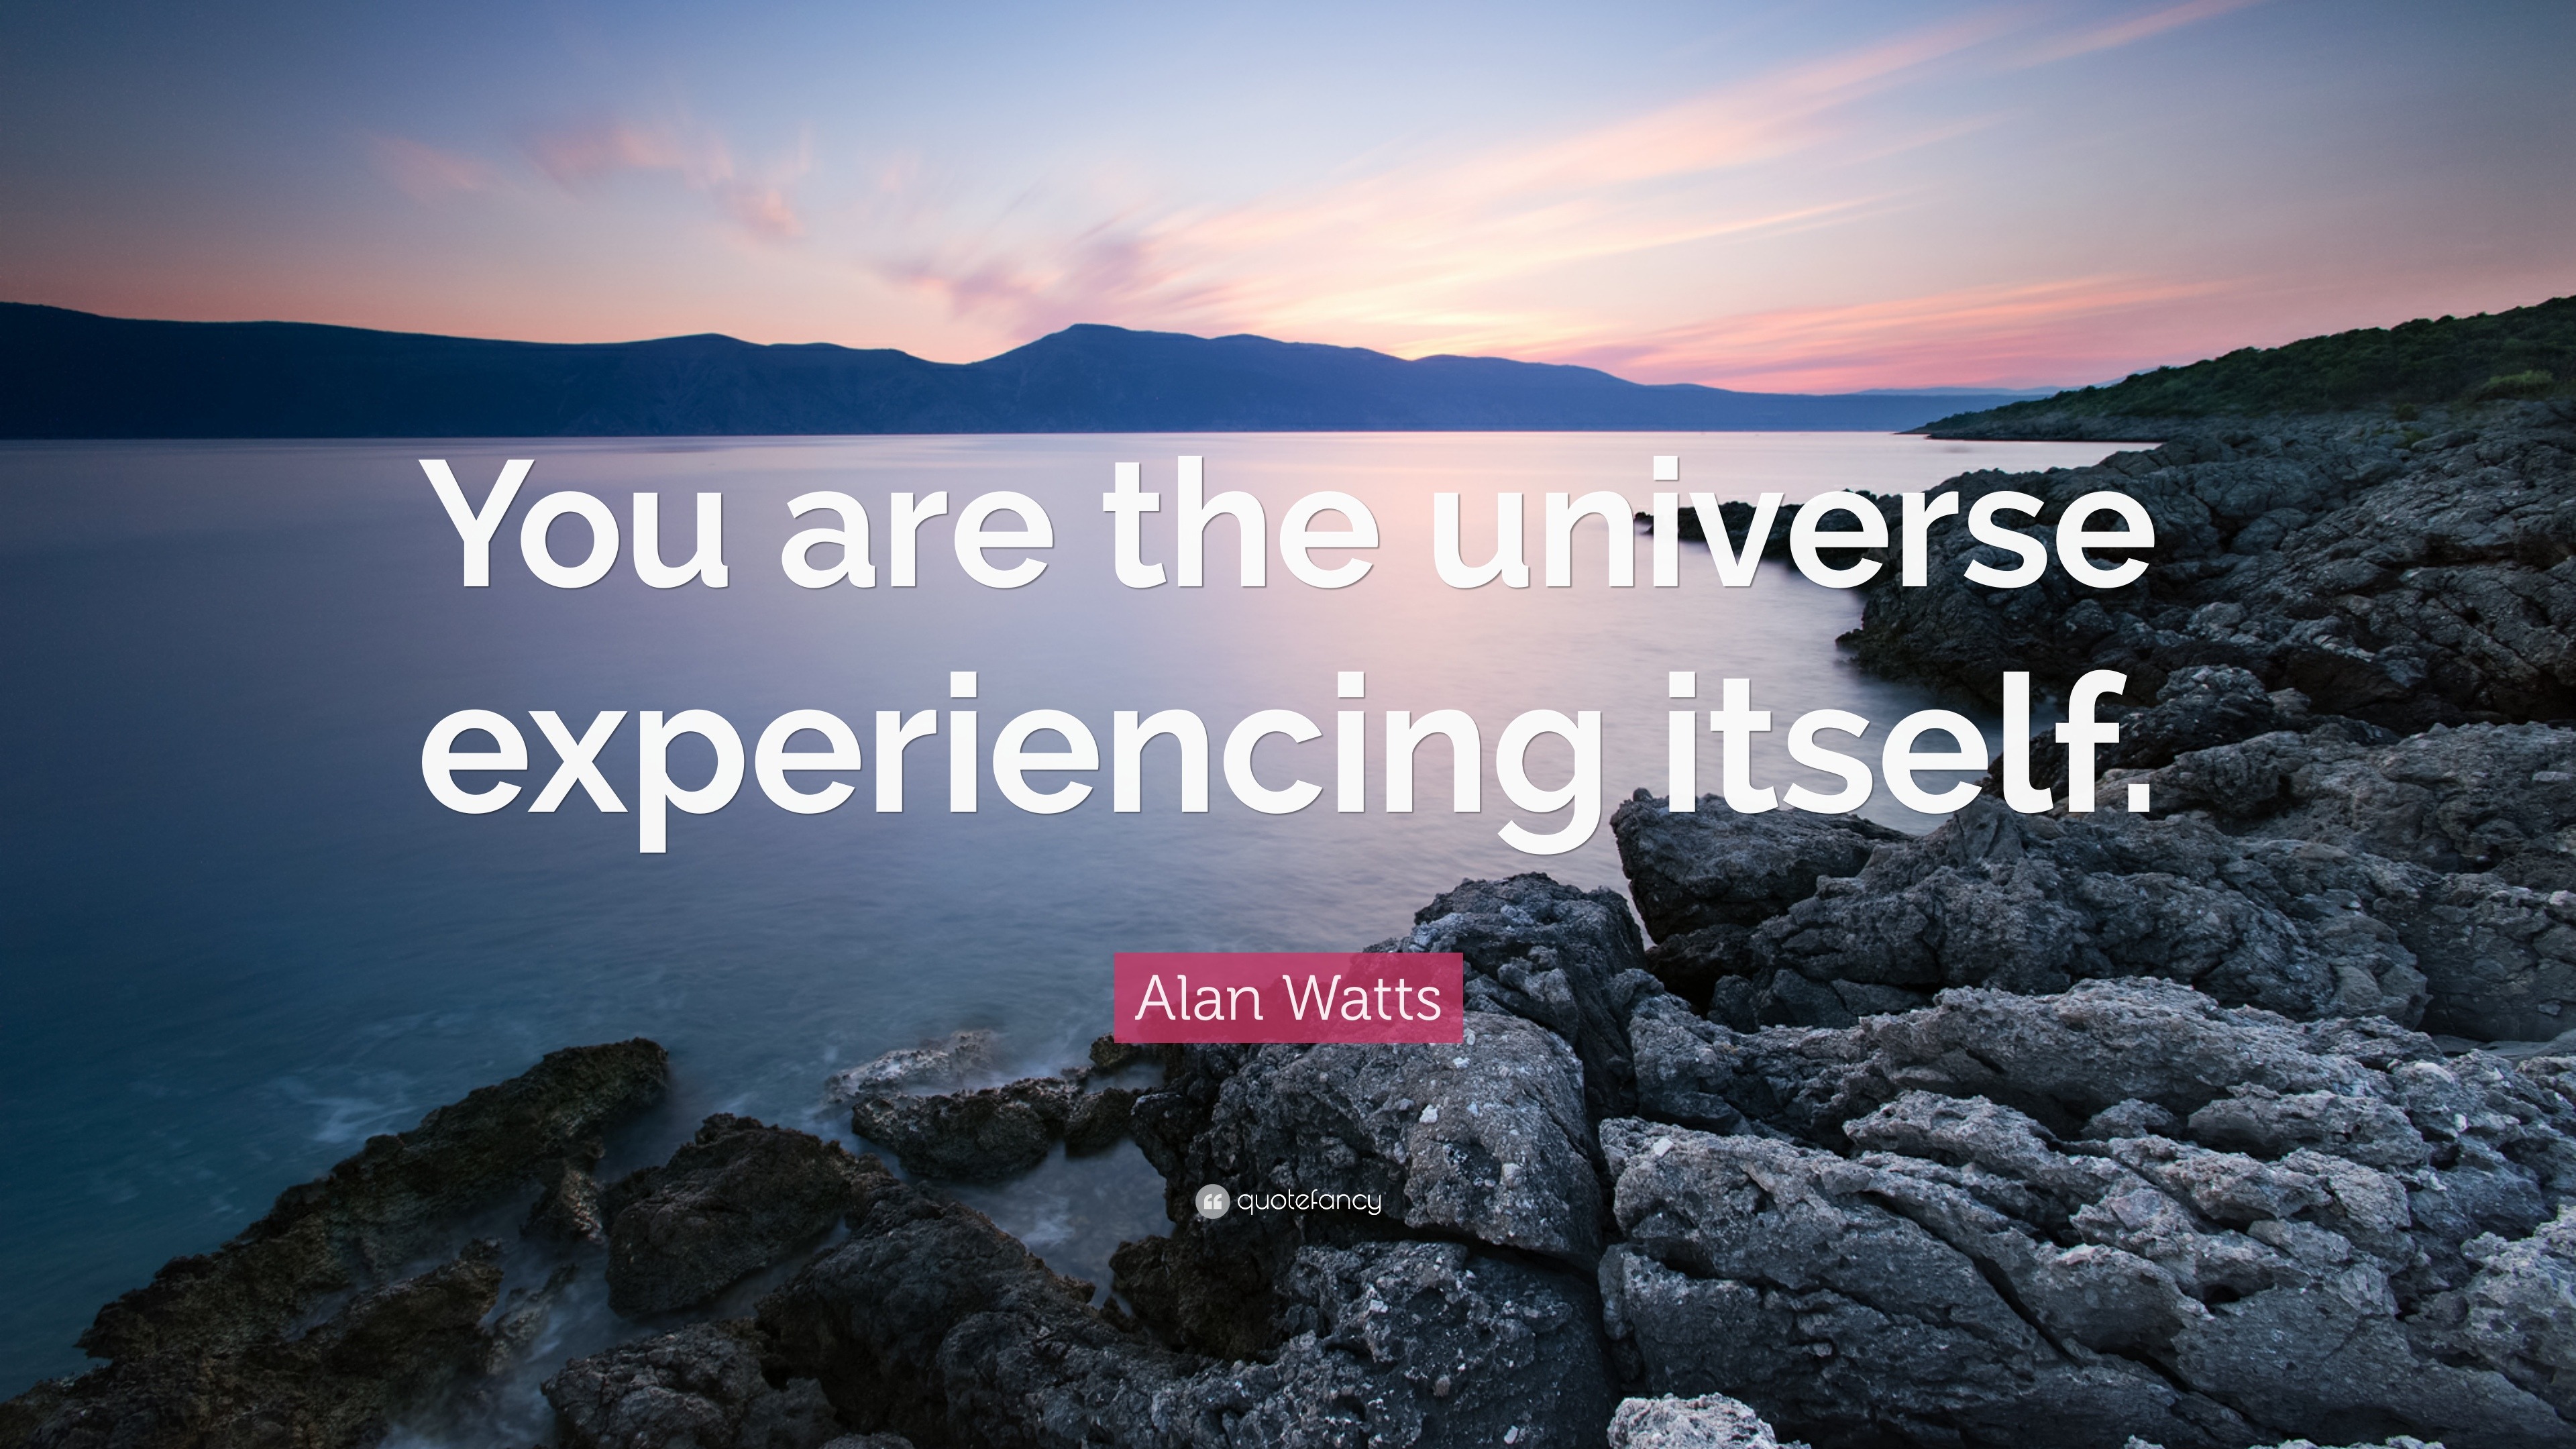 Alan Watts Quote: “You are the universe experiencing itself.”